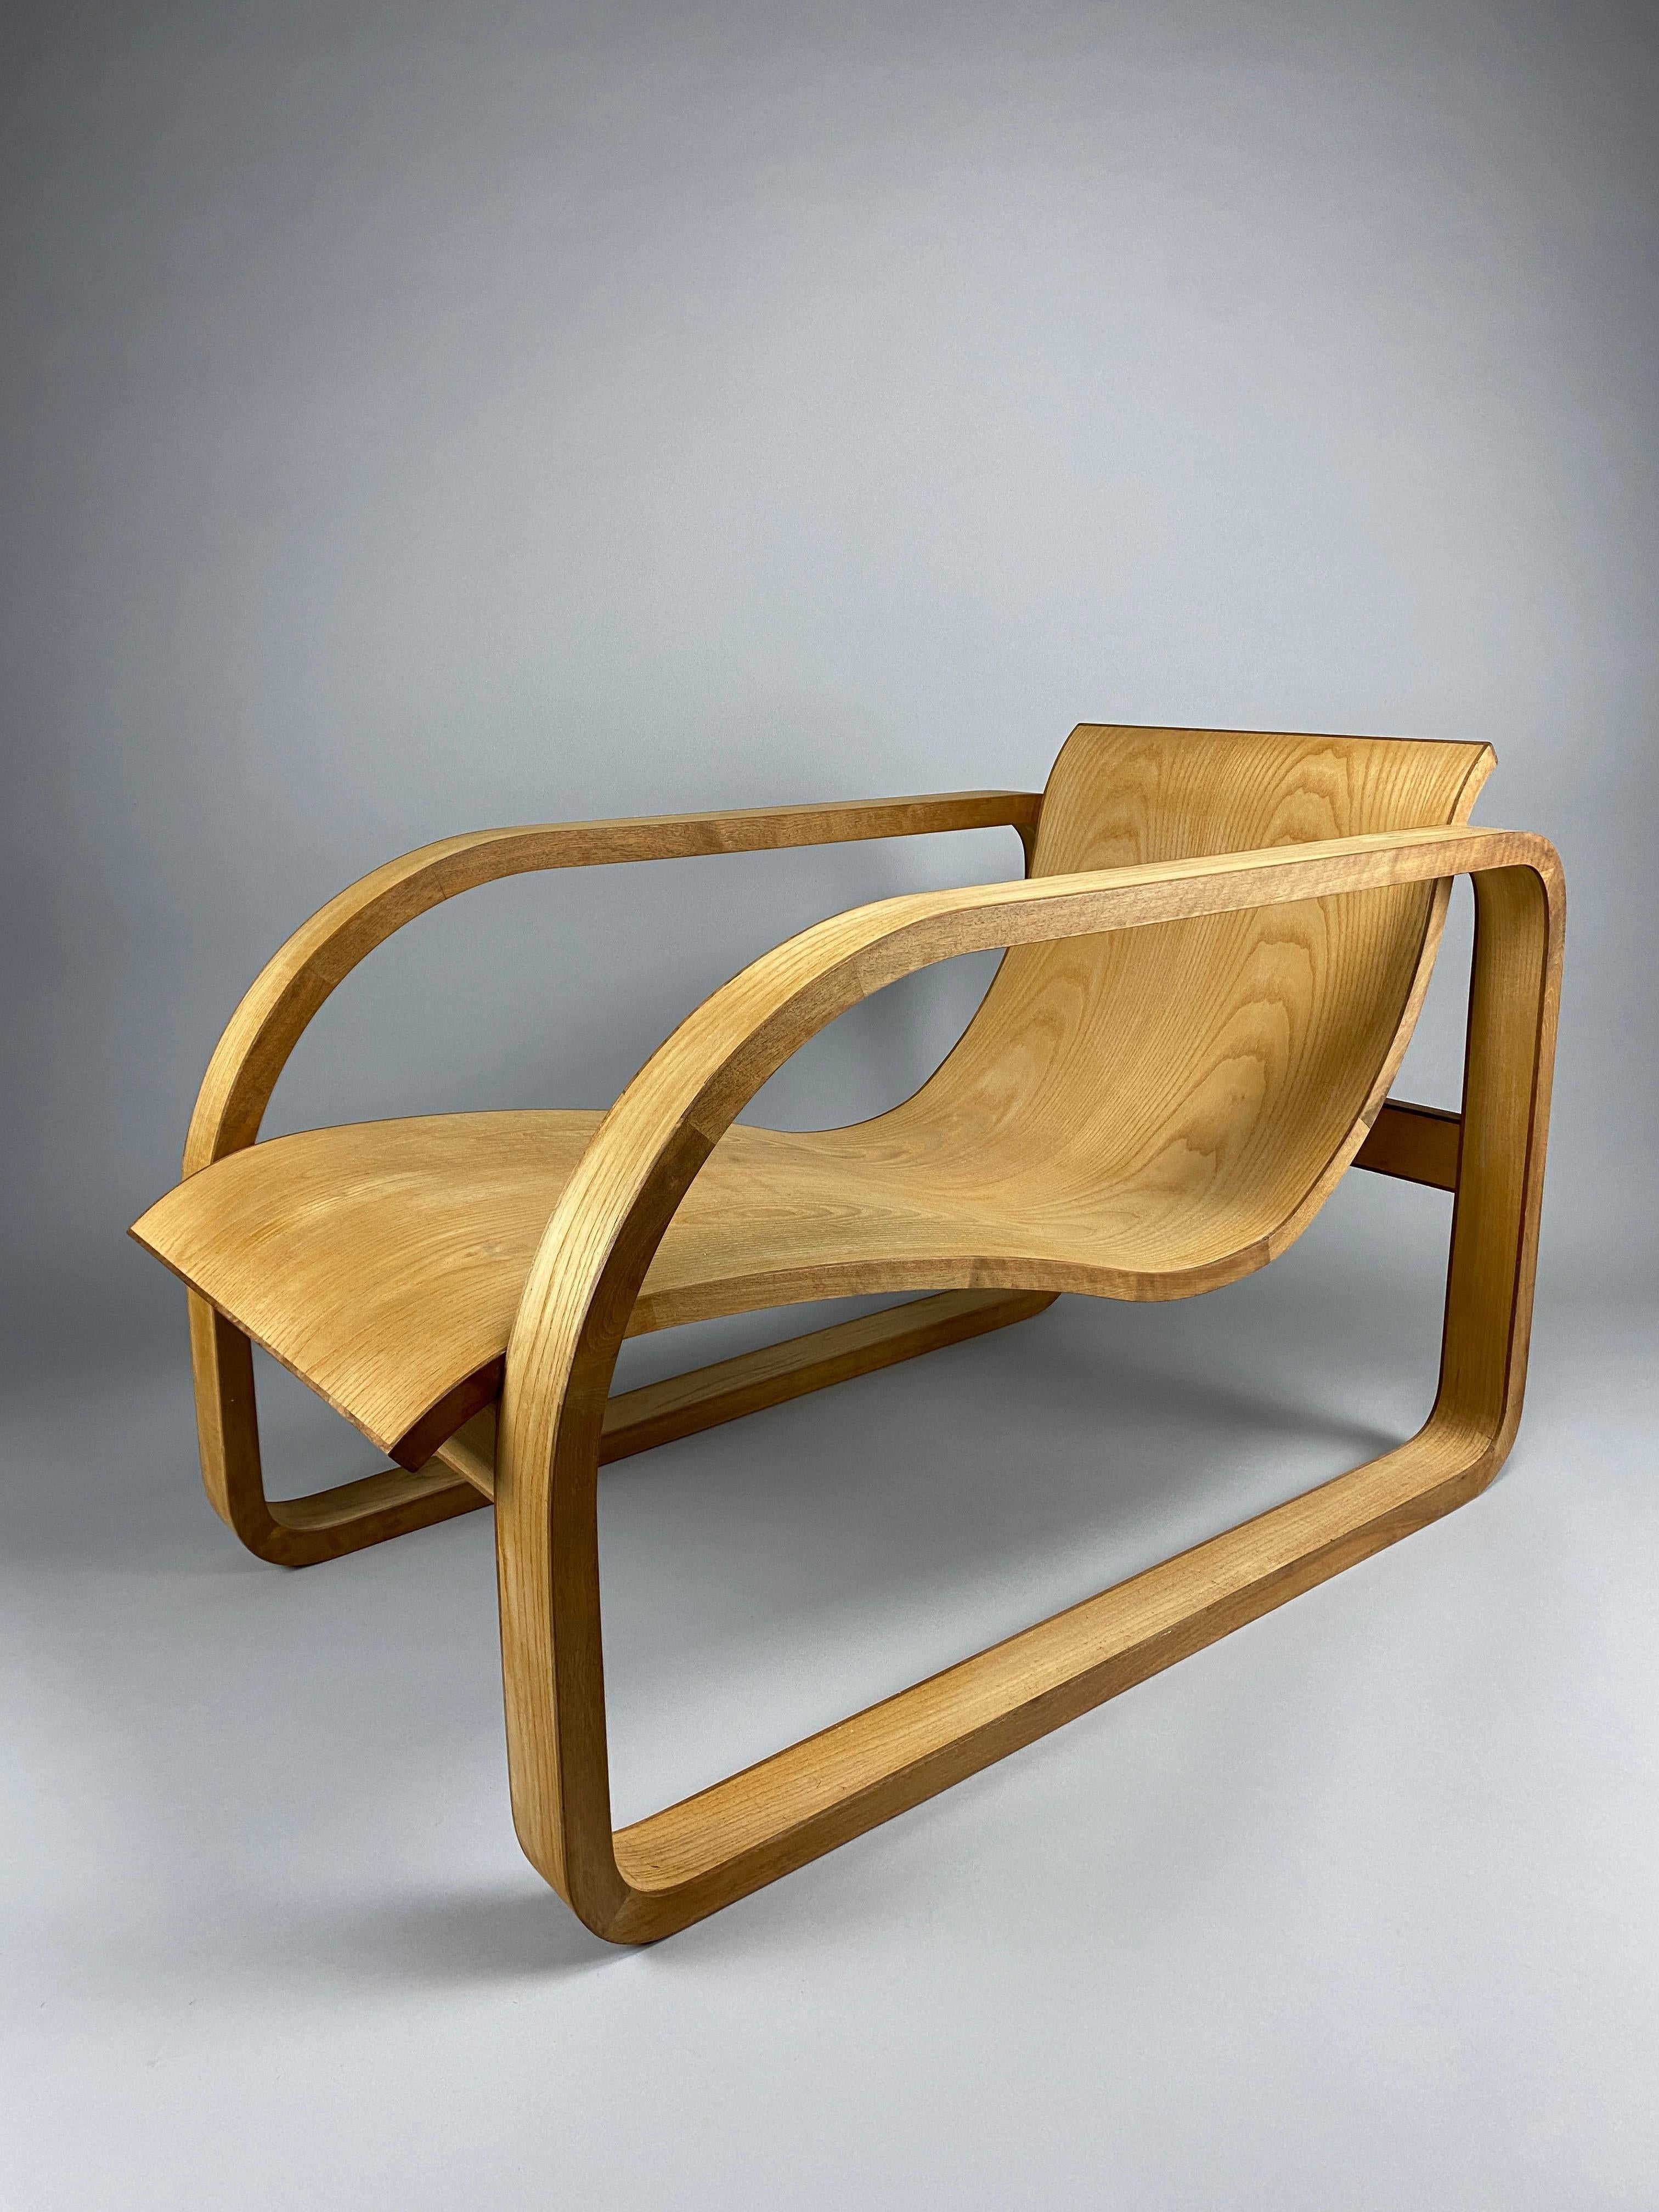 Introducing a Work of Art: The 1990's Lounge Chair

Elevate your space with a true masterpiece of design - the one-of-a-kind 1990's lounge chair. This extraordinary piece transcends the boundaries of furniture, captivating the eye with its exquisite